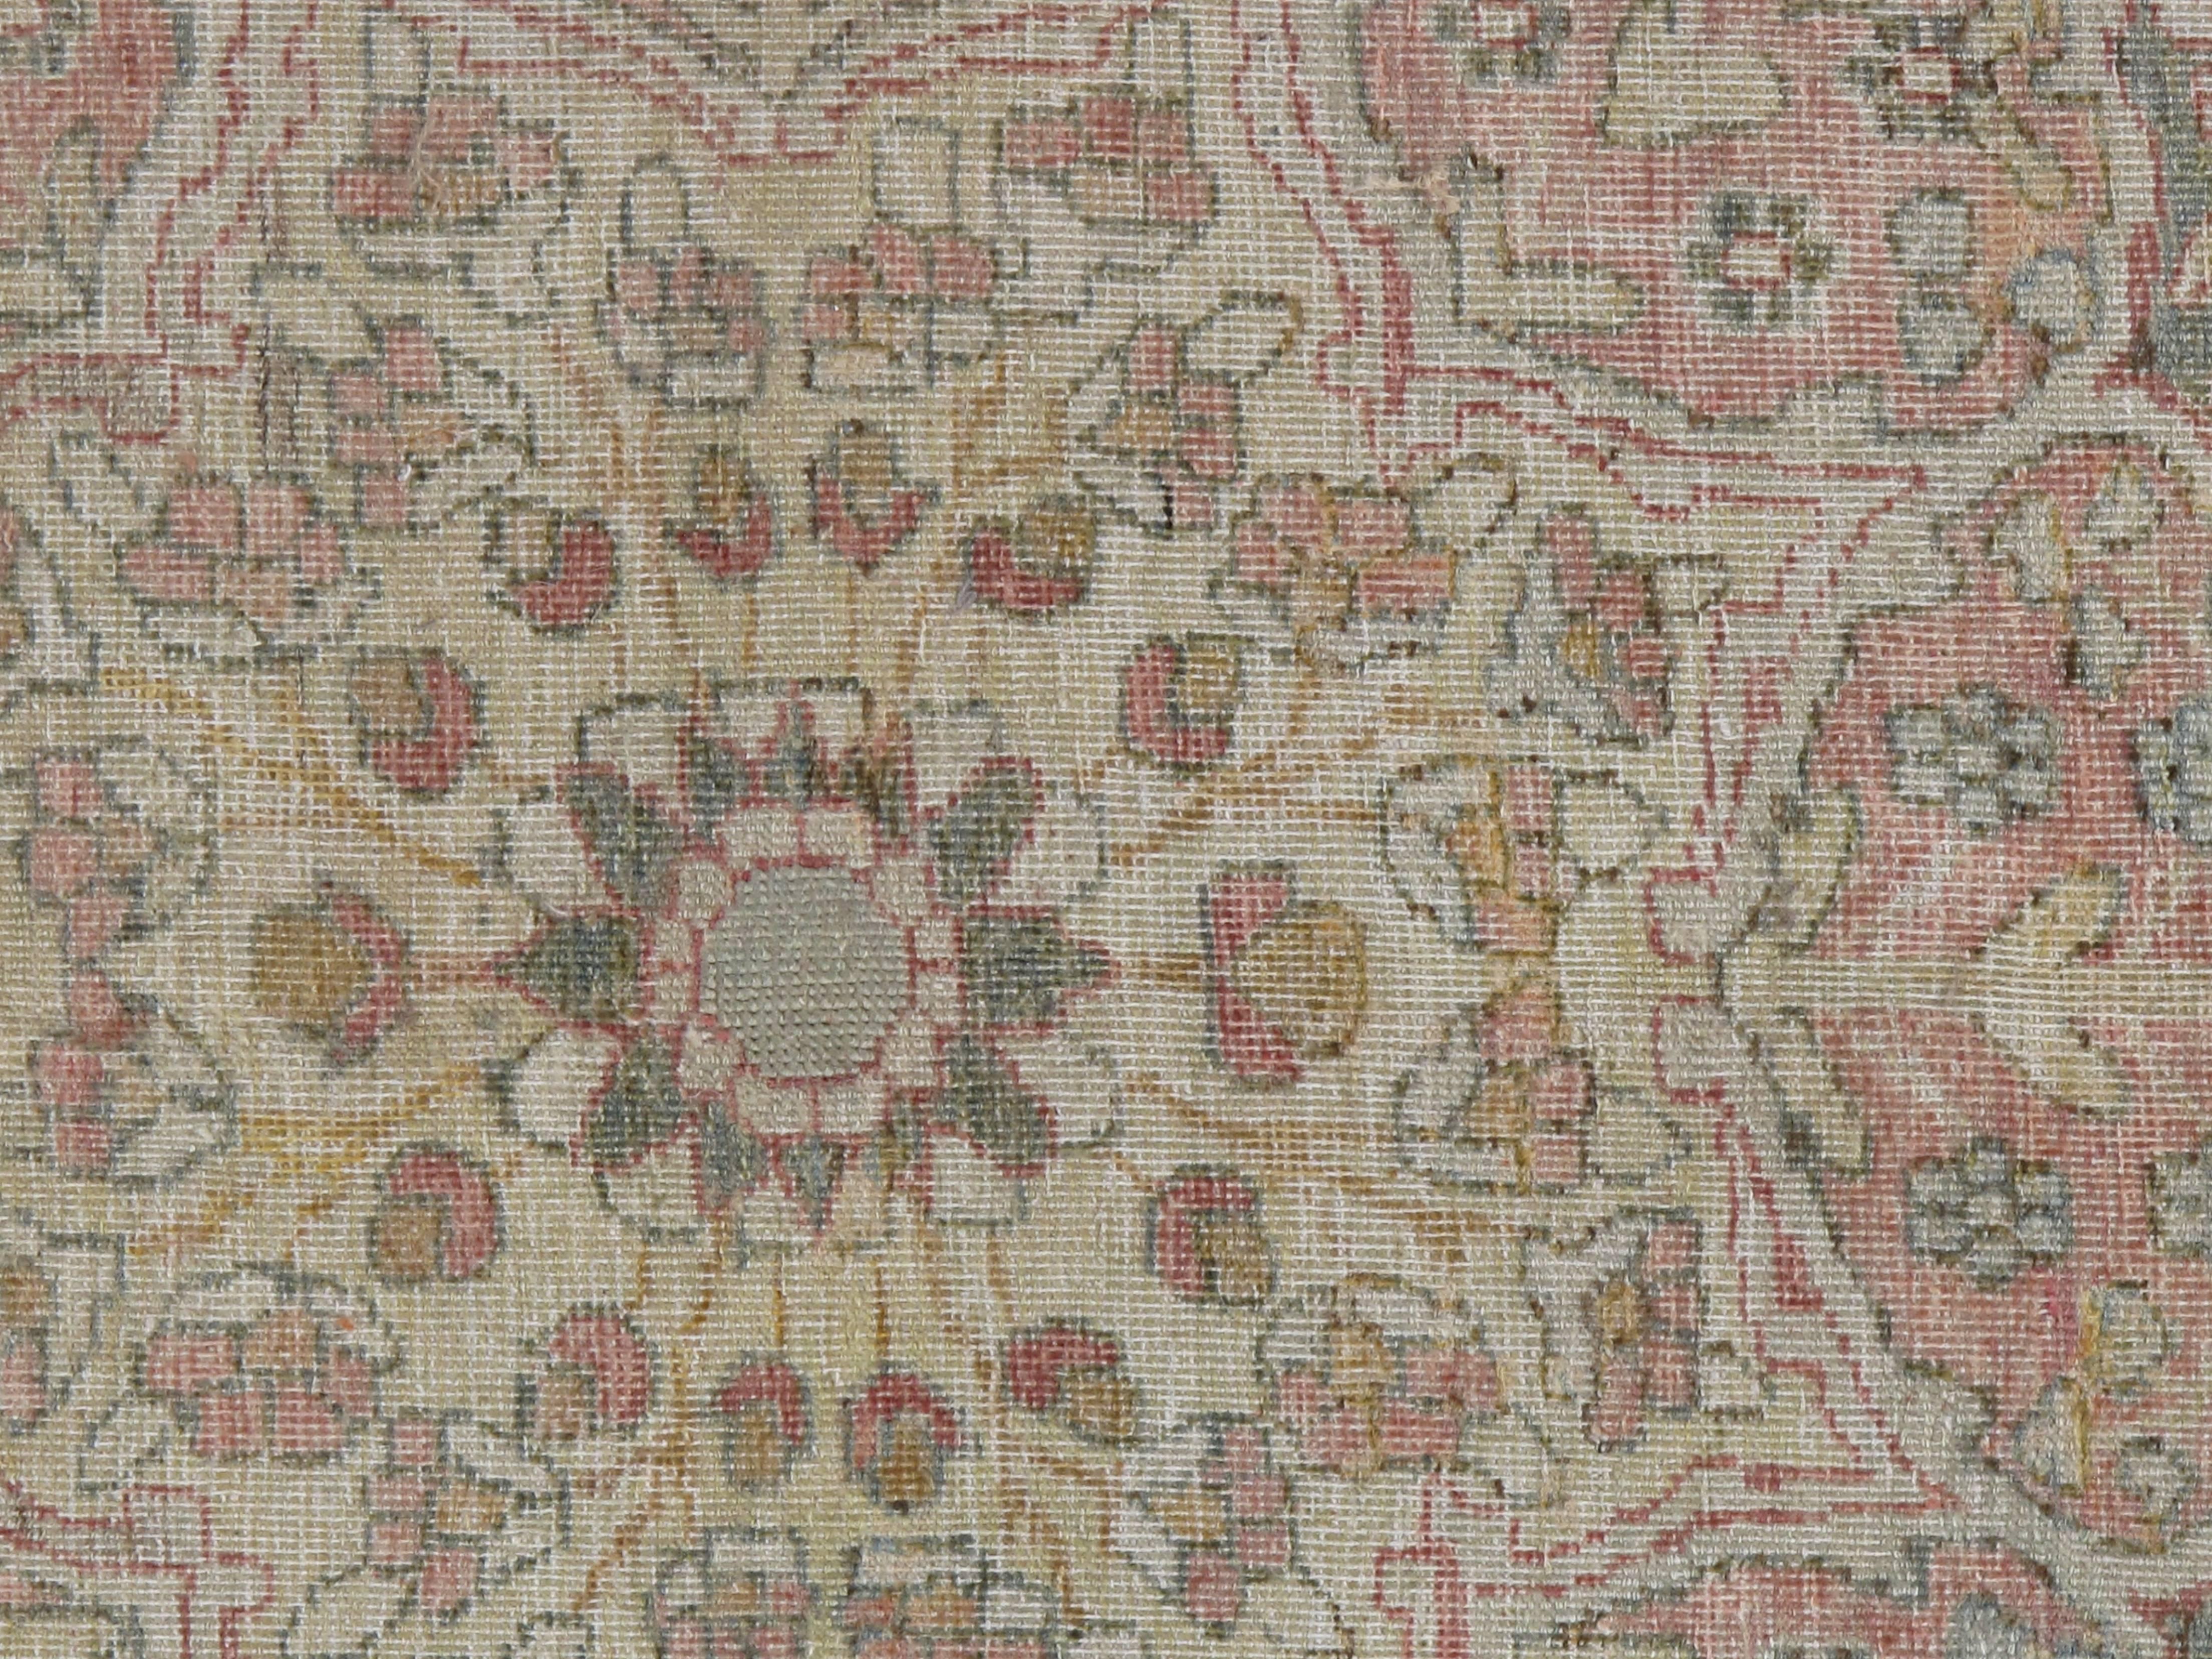 This master crafted Persian Laver Kerman carpet exemplifies the profound understanding of the artistic principles of balance and harmony that make art-level antique rugs so inspiring to live with. Indicative of the best classical Persian carpets of